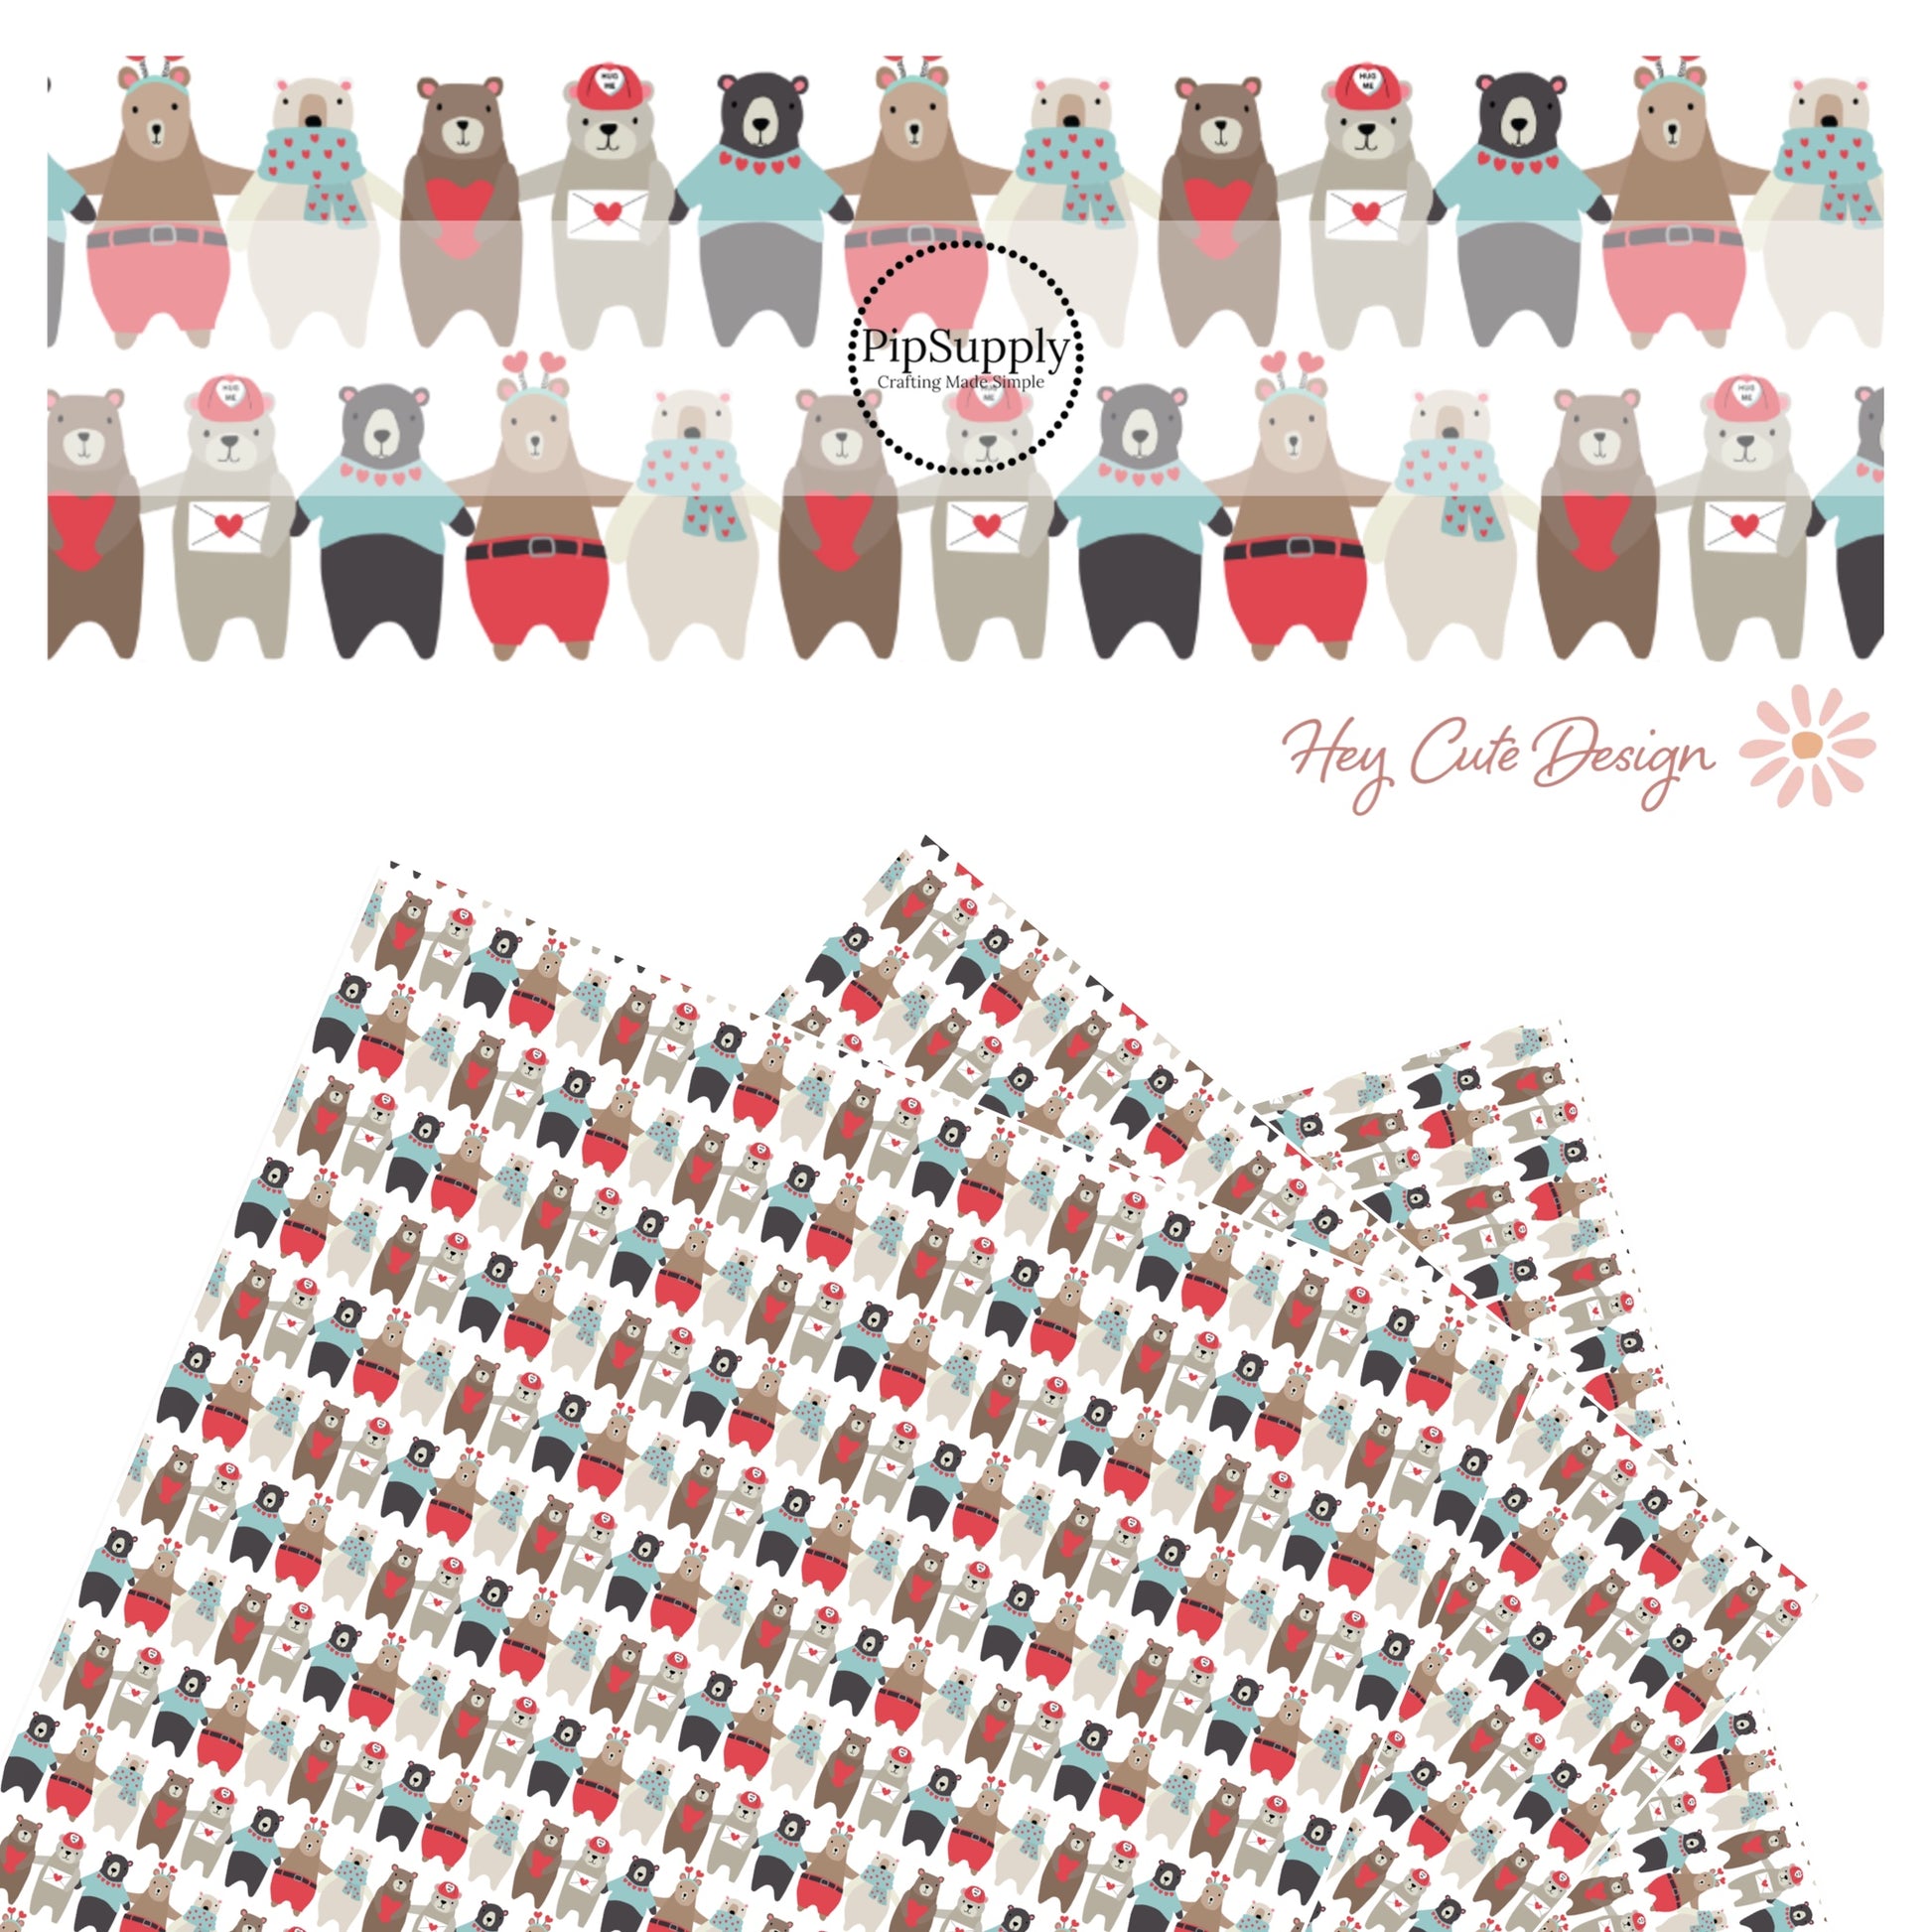 White bear with blue scarf with red hearts, black bear with blue sweater, and brown bear with red shorts and heart headband on white faux leather sheet